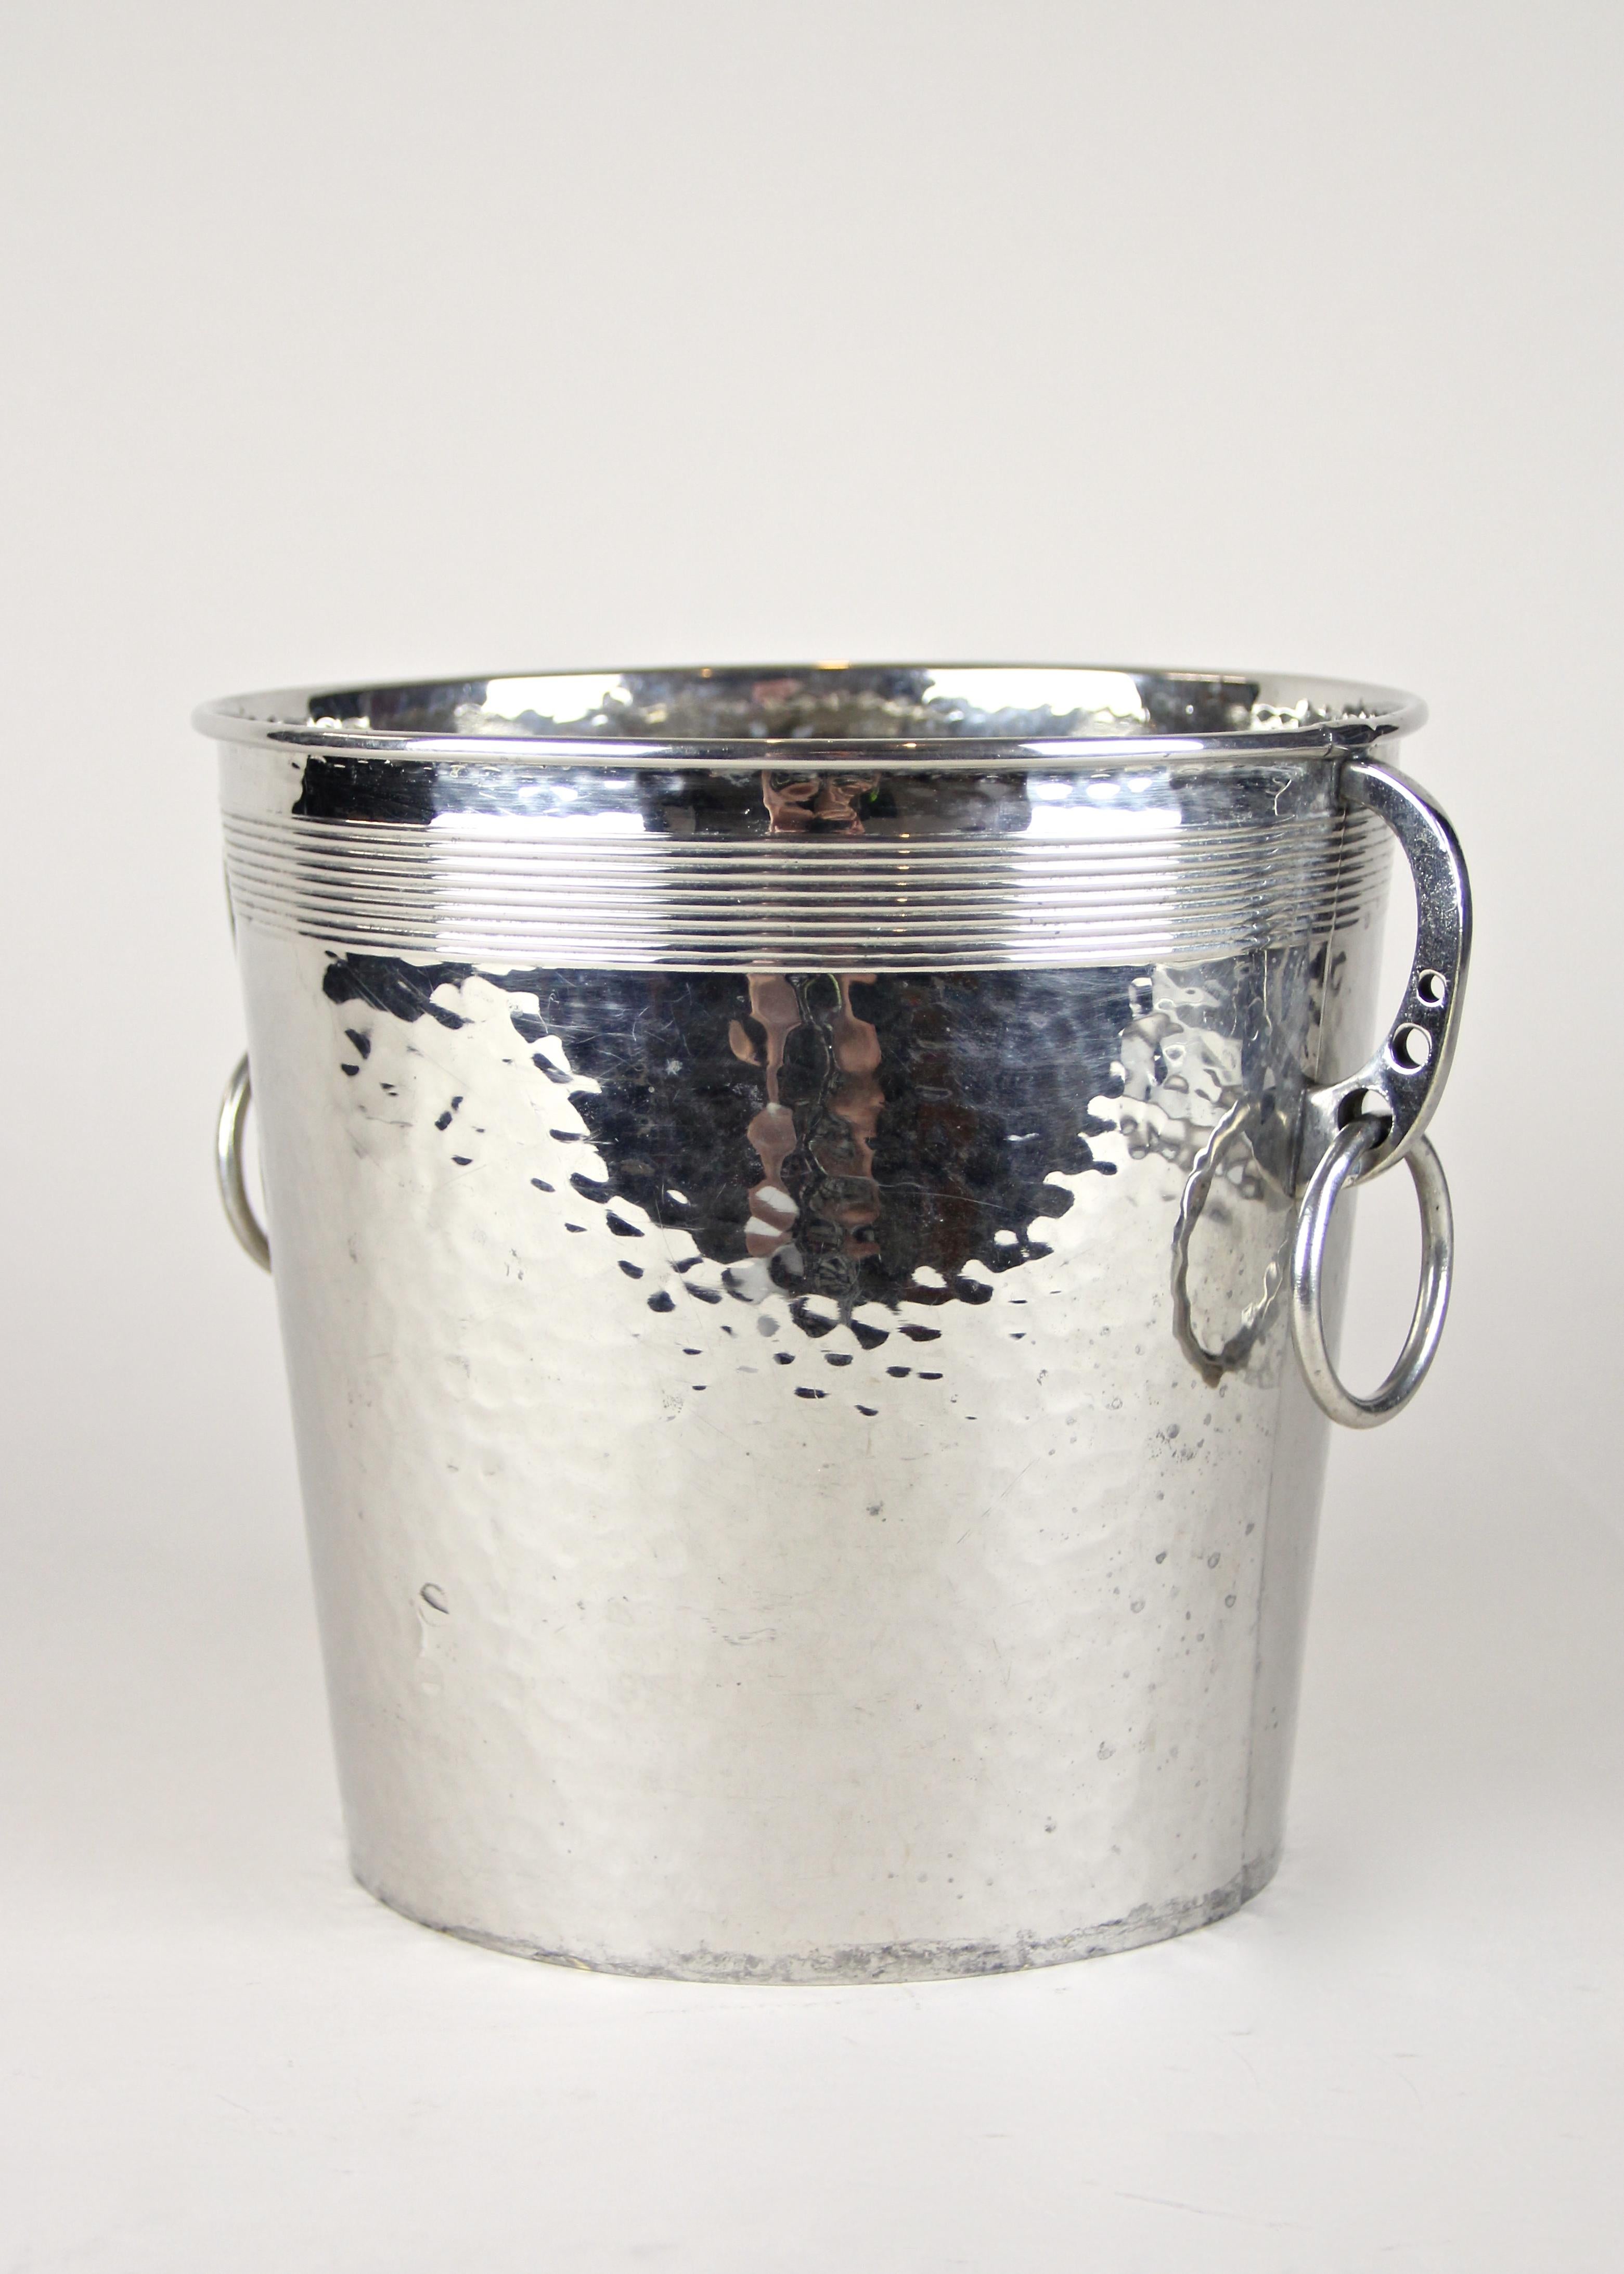 Lovely silvered brass champagne cooler artfully processed by the famous company of WMF. Coming from the Art Nouveau period in Germany circa 1915, this beautiful designed silvered bottle holder shows an exclusive hammer finished surface and great